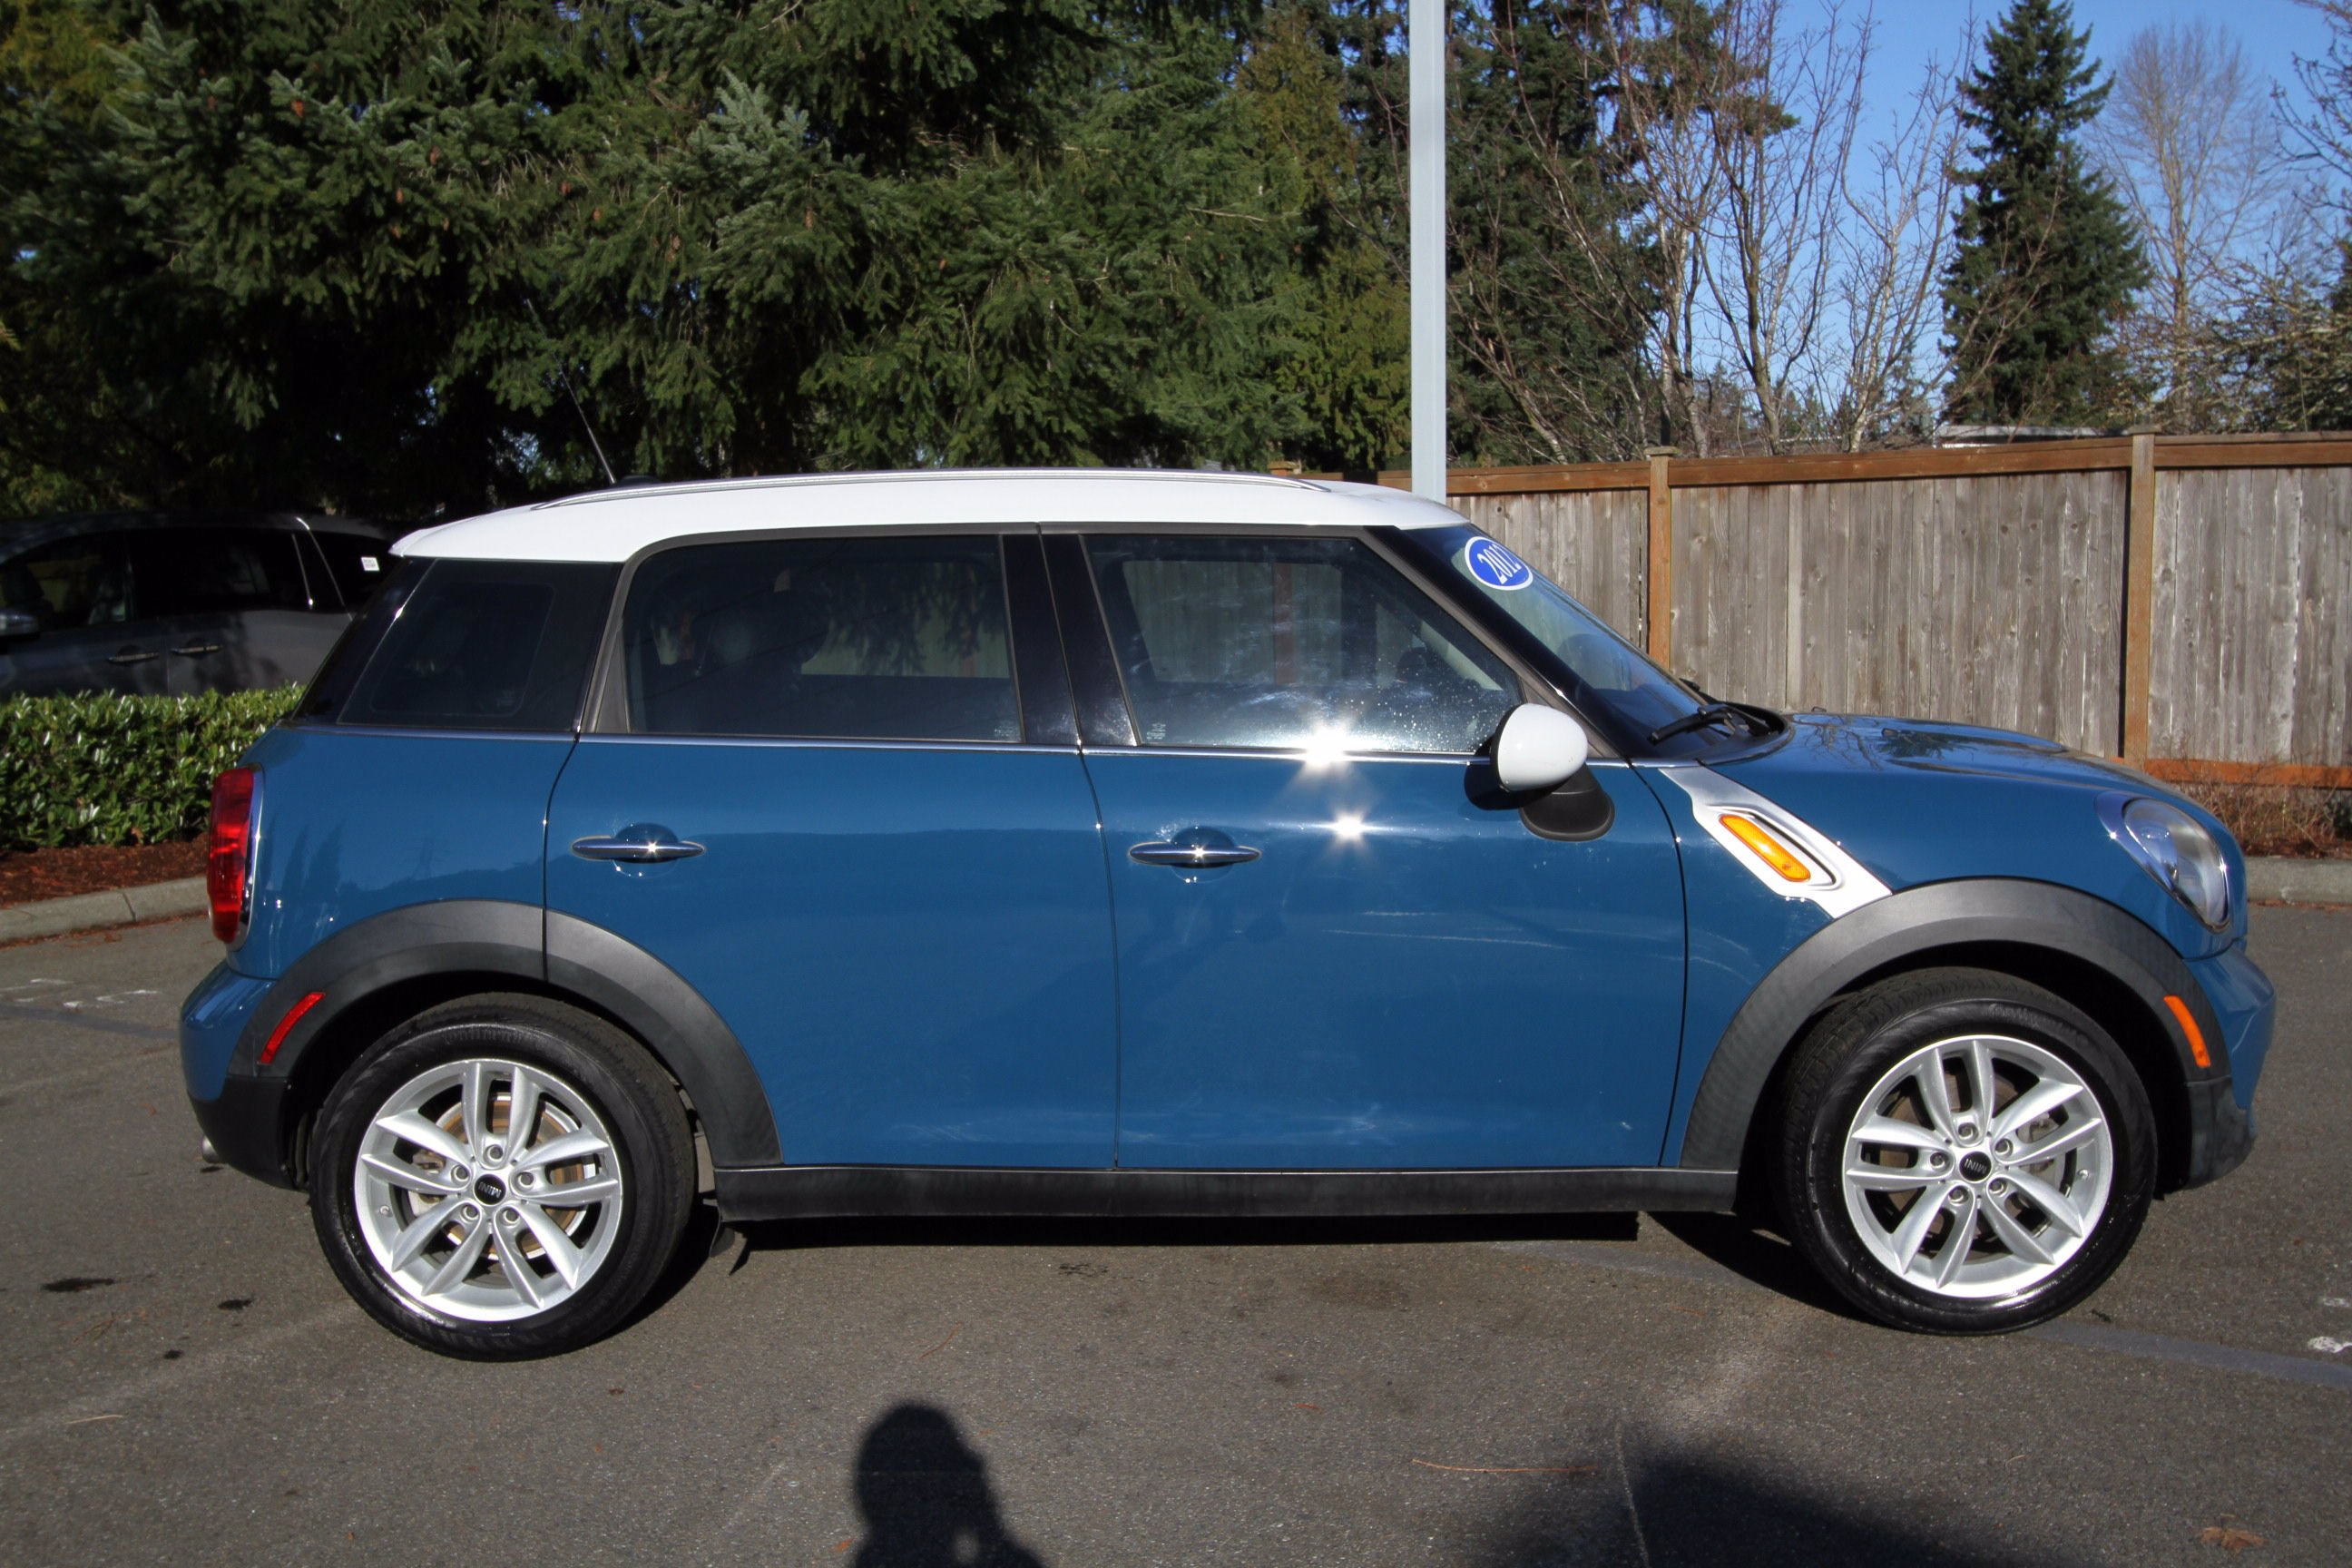 Pre-Owned 2012 MINI Cooper Countryman Base 4dr Car in Kirkland #192321A ...